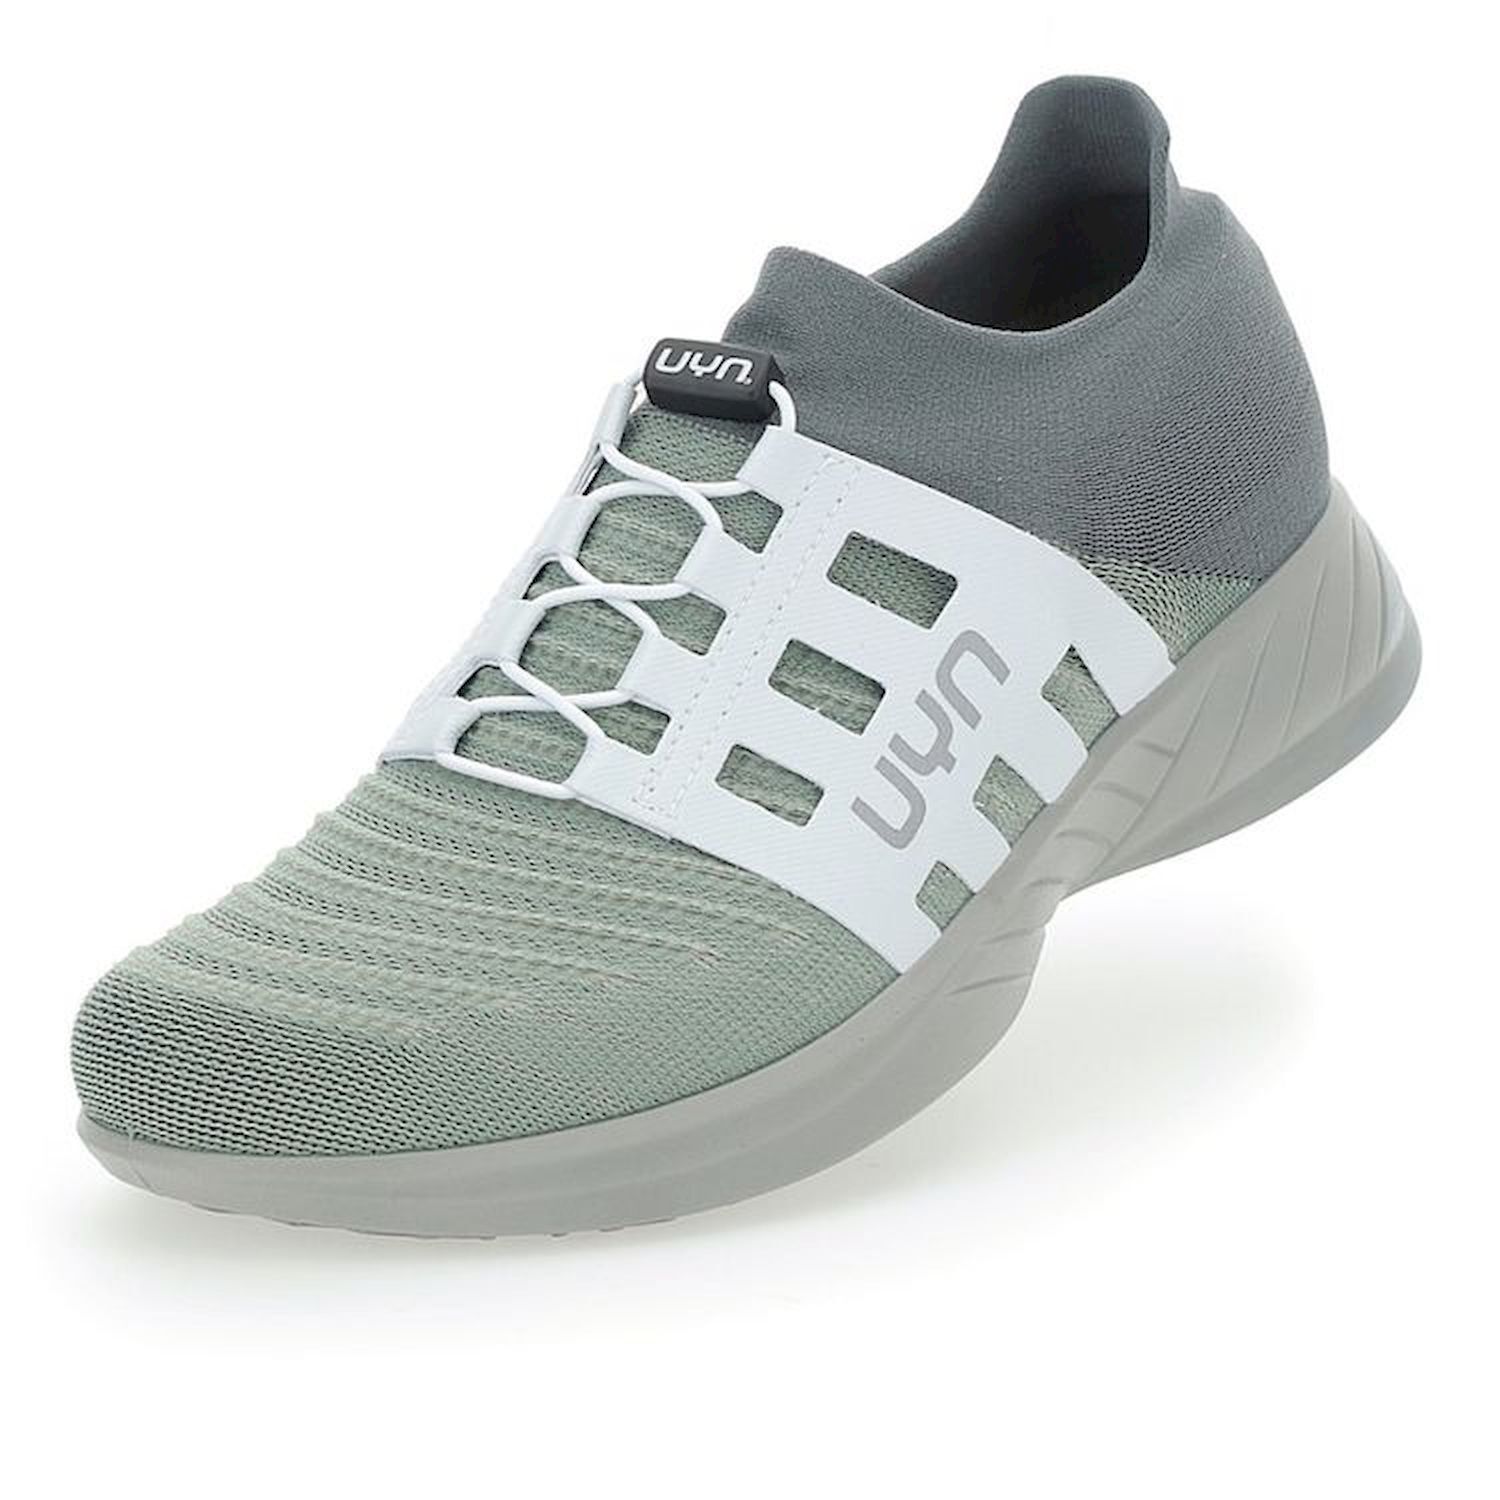 Uyn Ecolypt Tune Shoes Grey Sole - Chaussures running homme | Hardloop